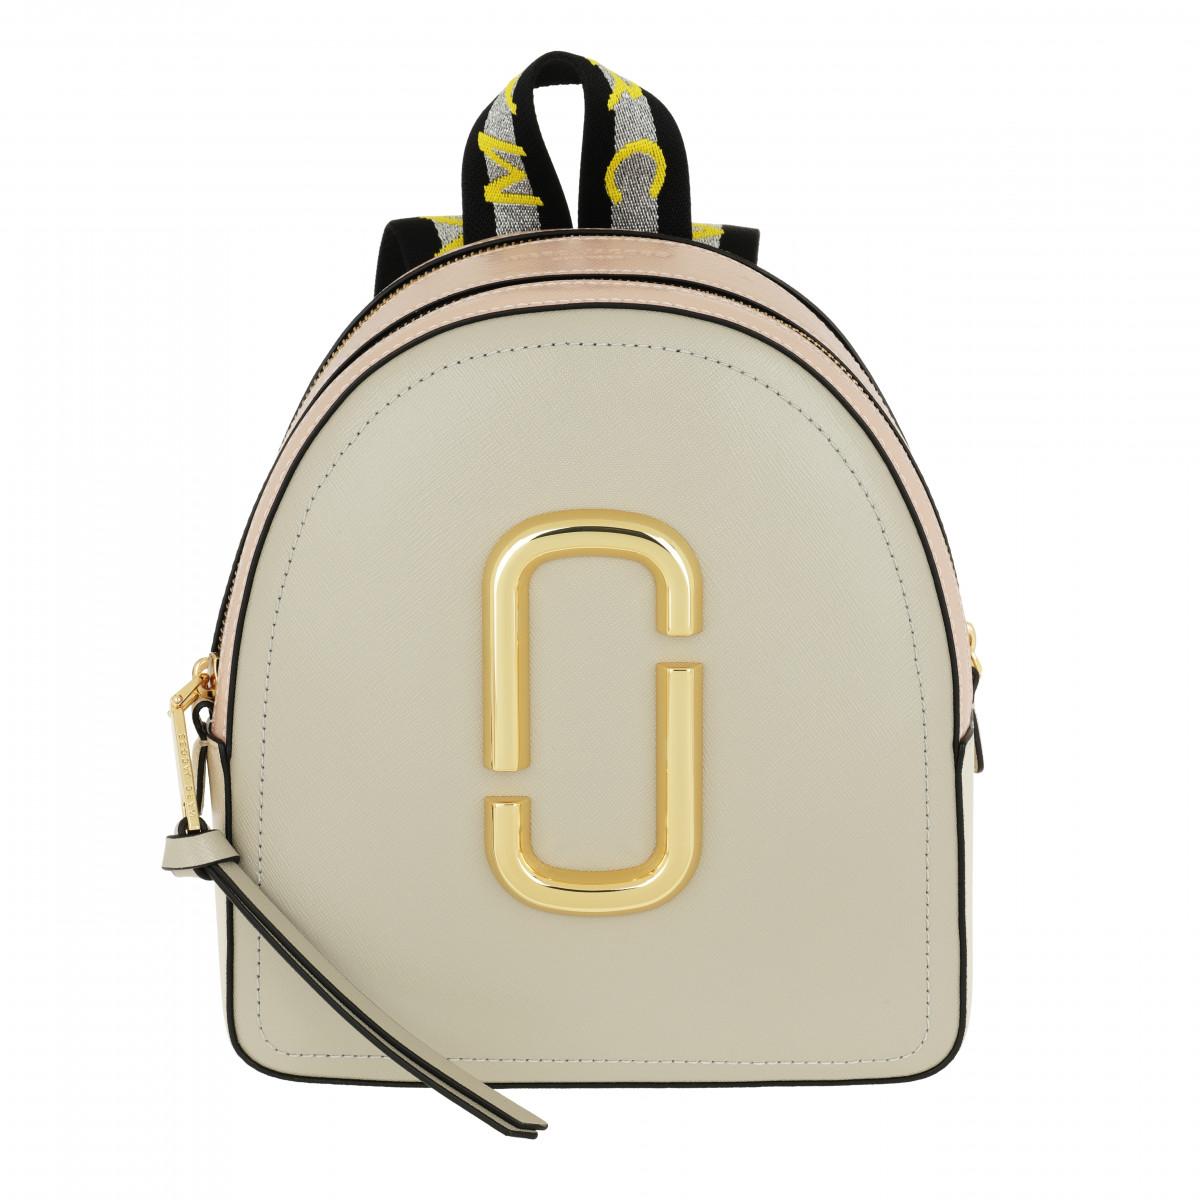 Backpacks Marc Jacobs - Pack Shot small saffiano leather backpack